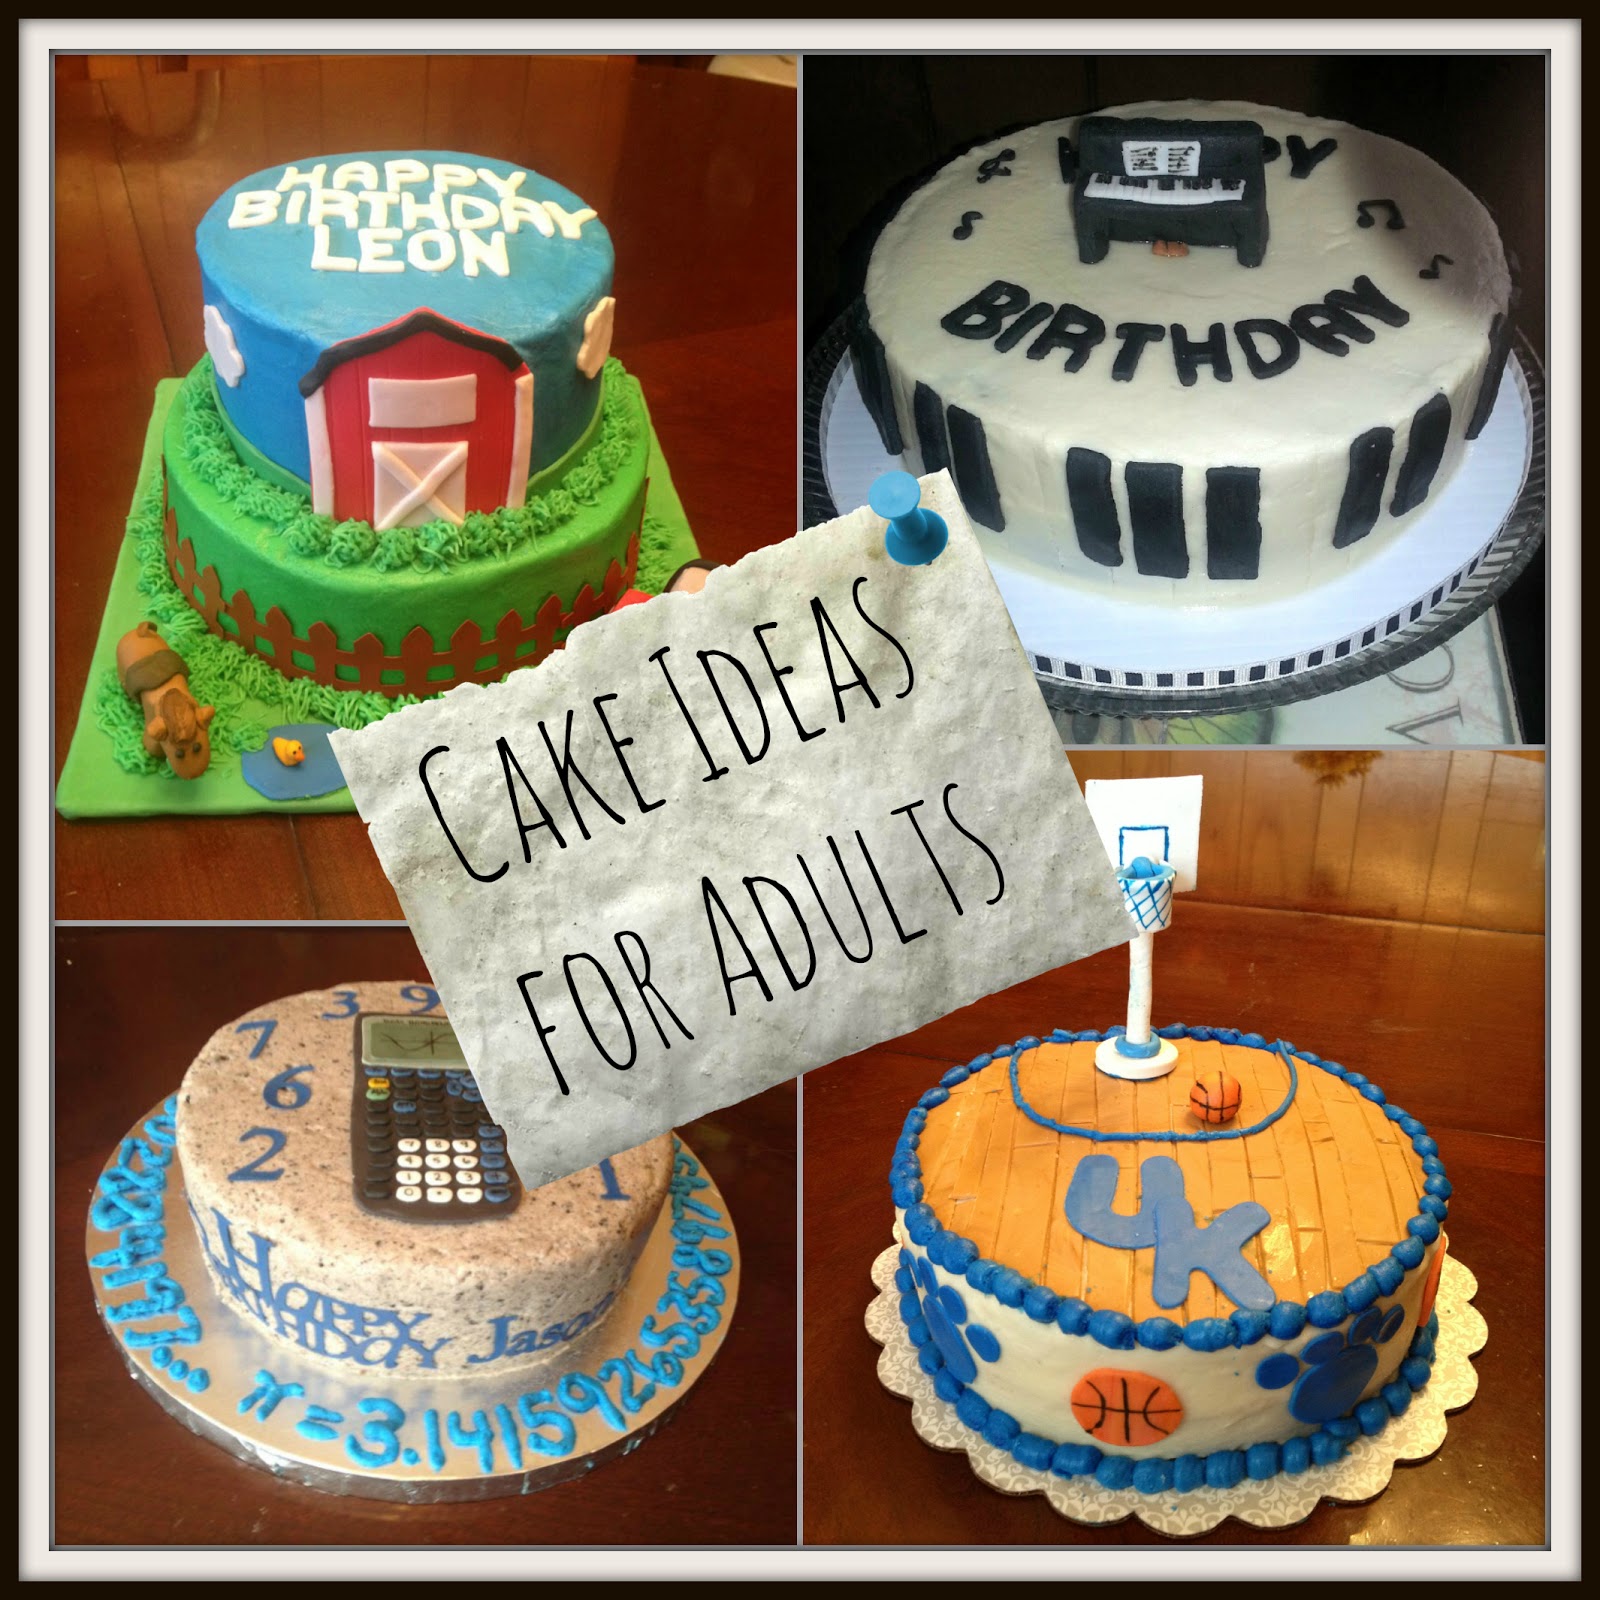 Birthday cakes for adults recipes